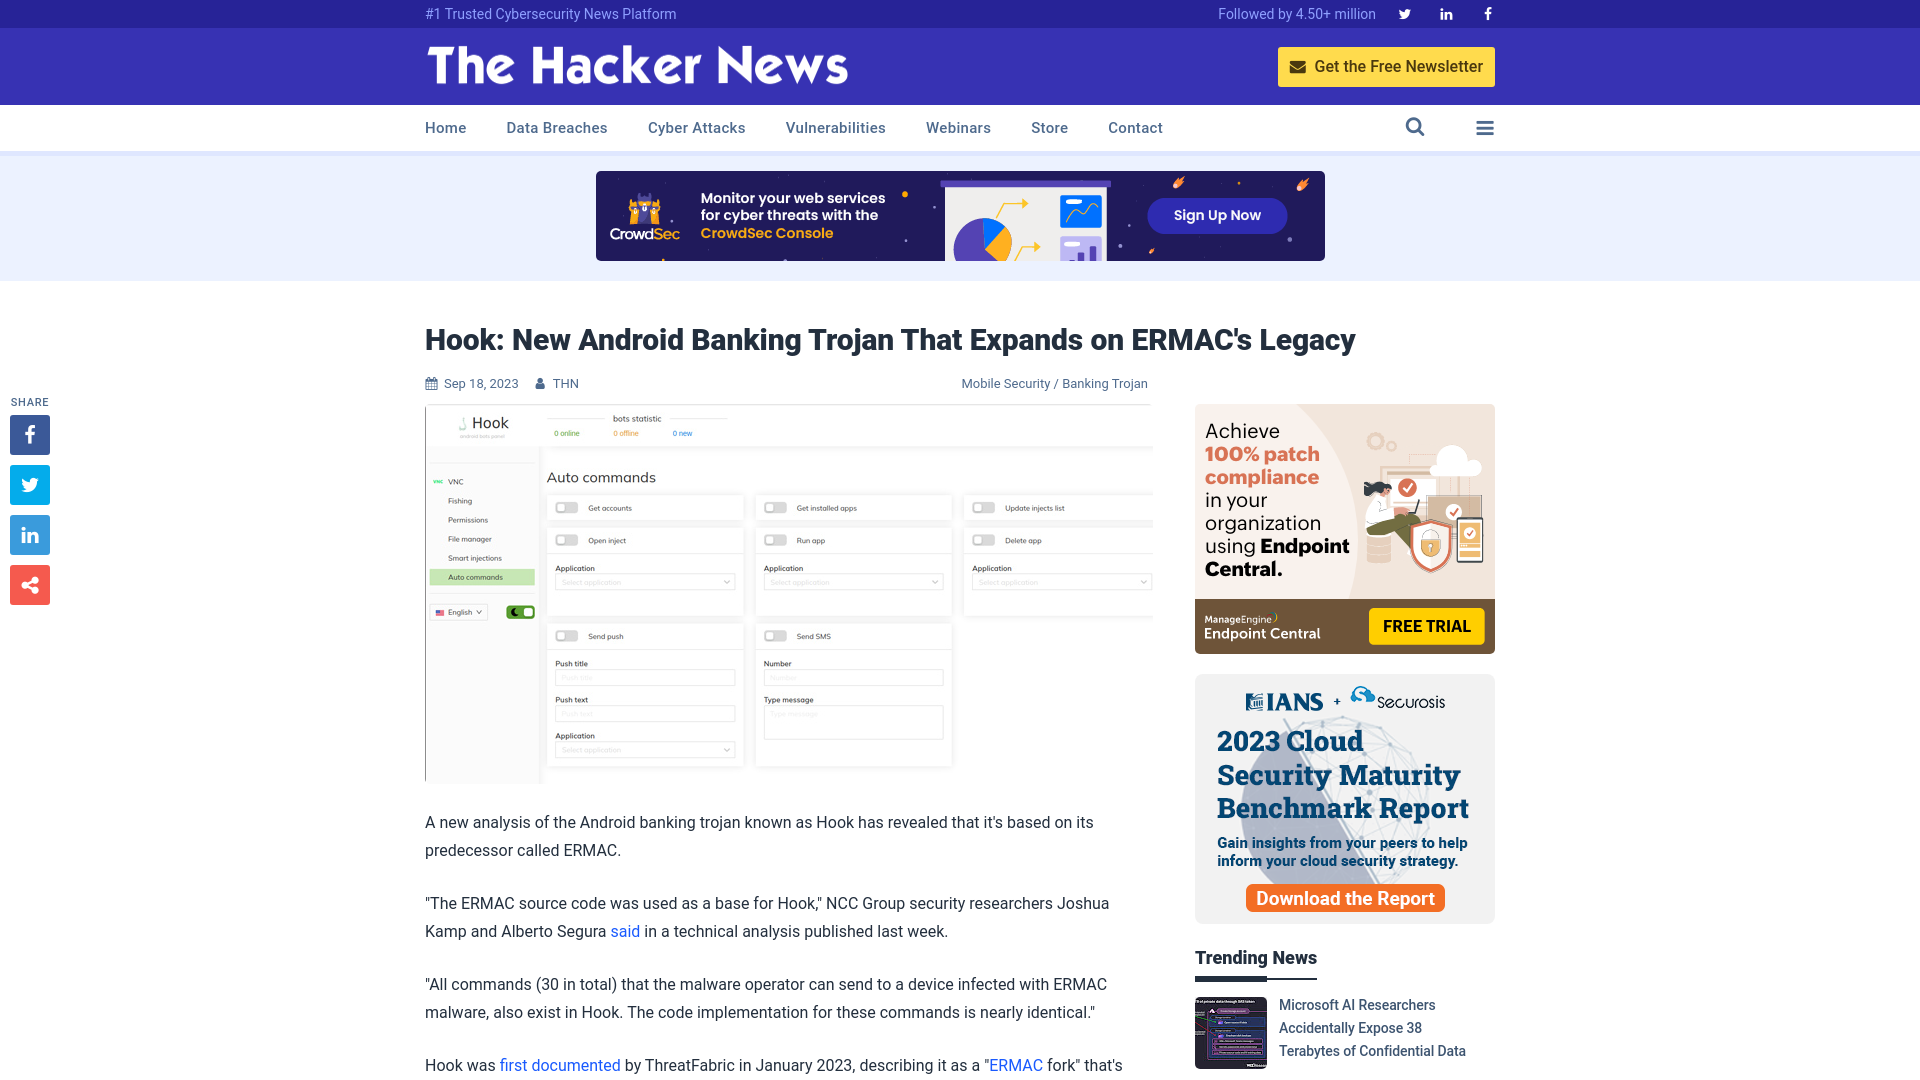 Hook: New Android Banking Trojan That Expands on ERMAC's Legacy